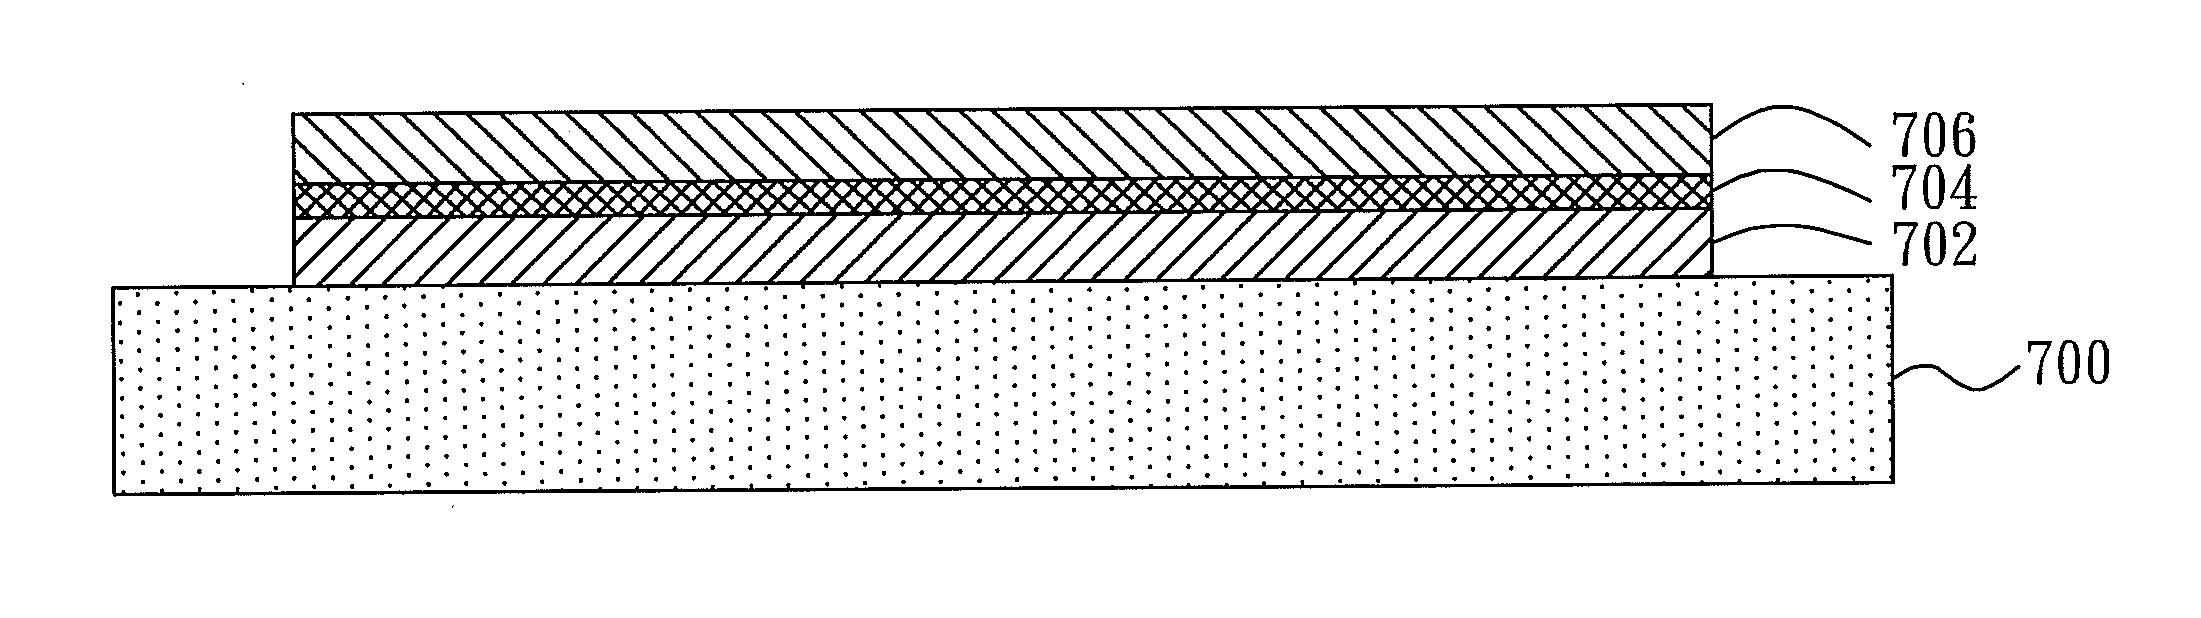 Method for manufacturing a hard, water-resistant Anti-fog coating